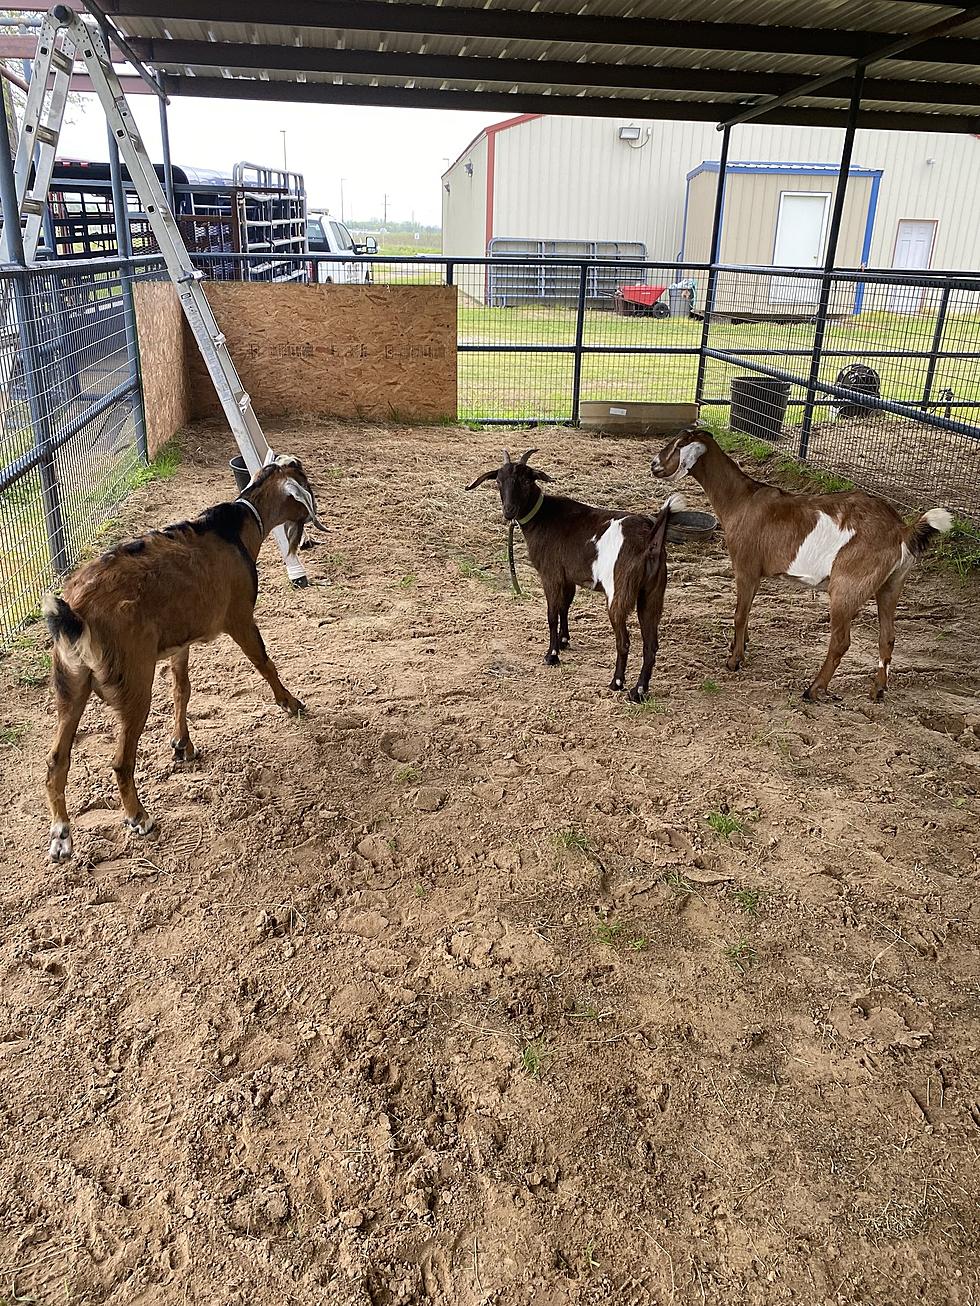 Caddo Sheriff’s Department Asks: Are You Looking for Your Goats?